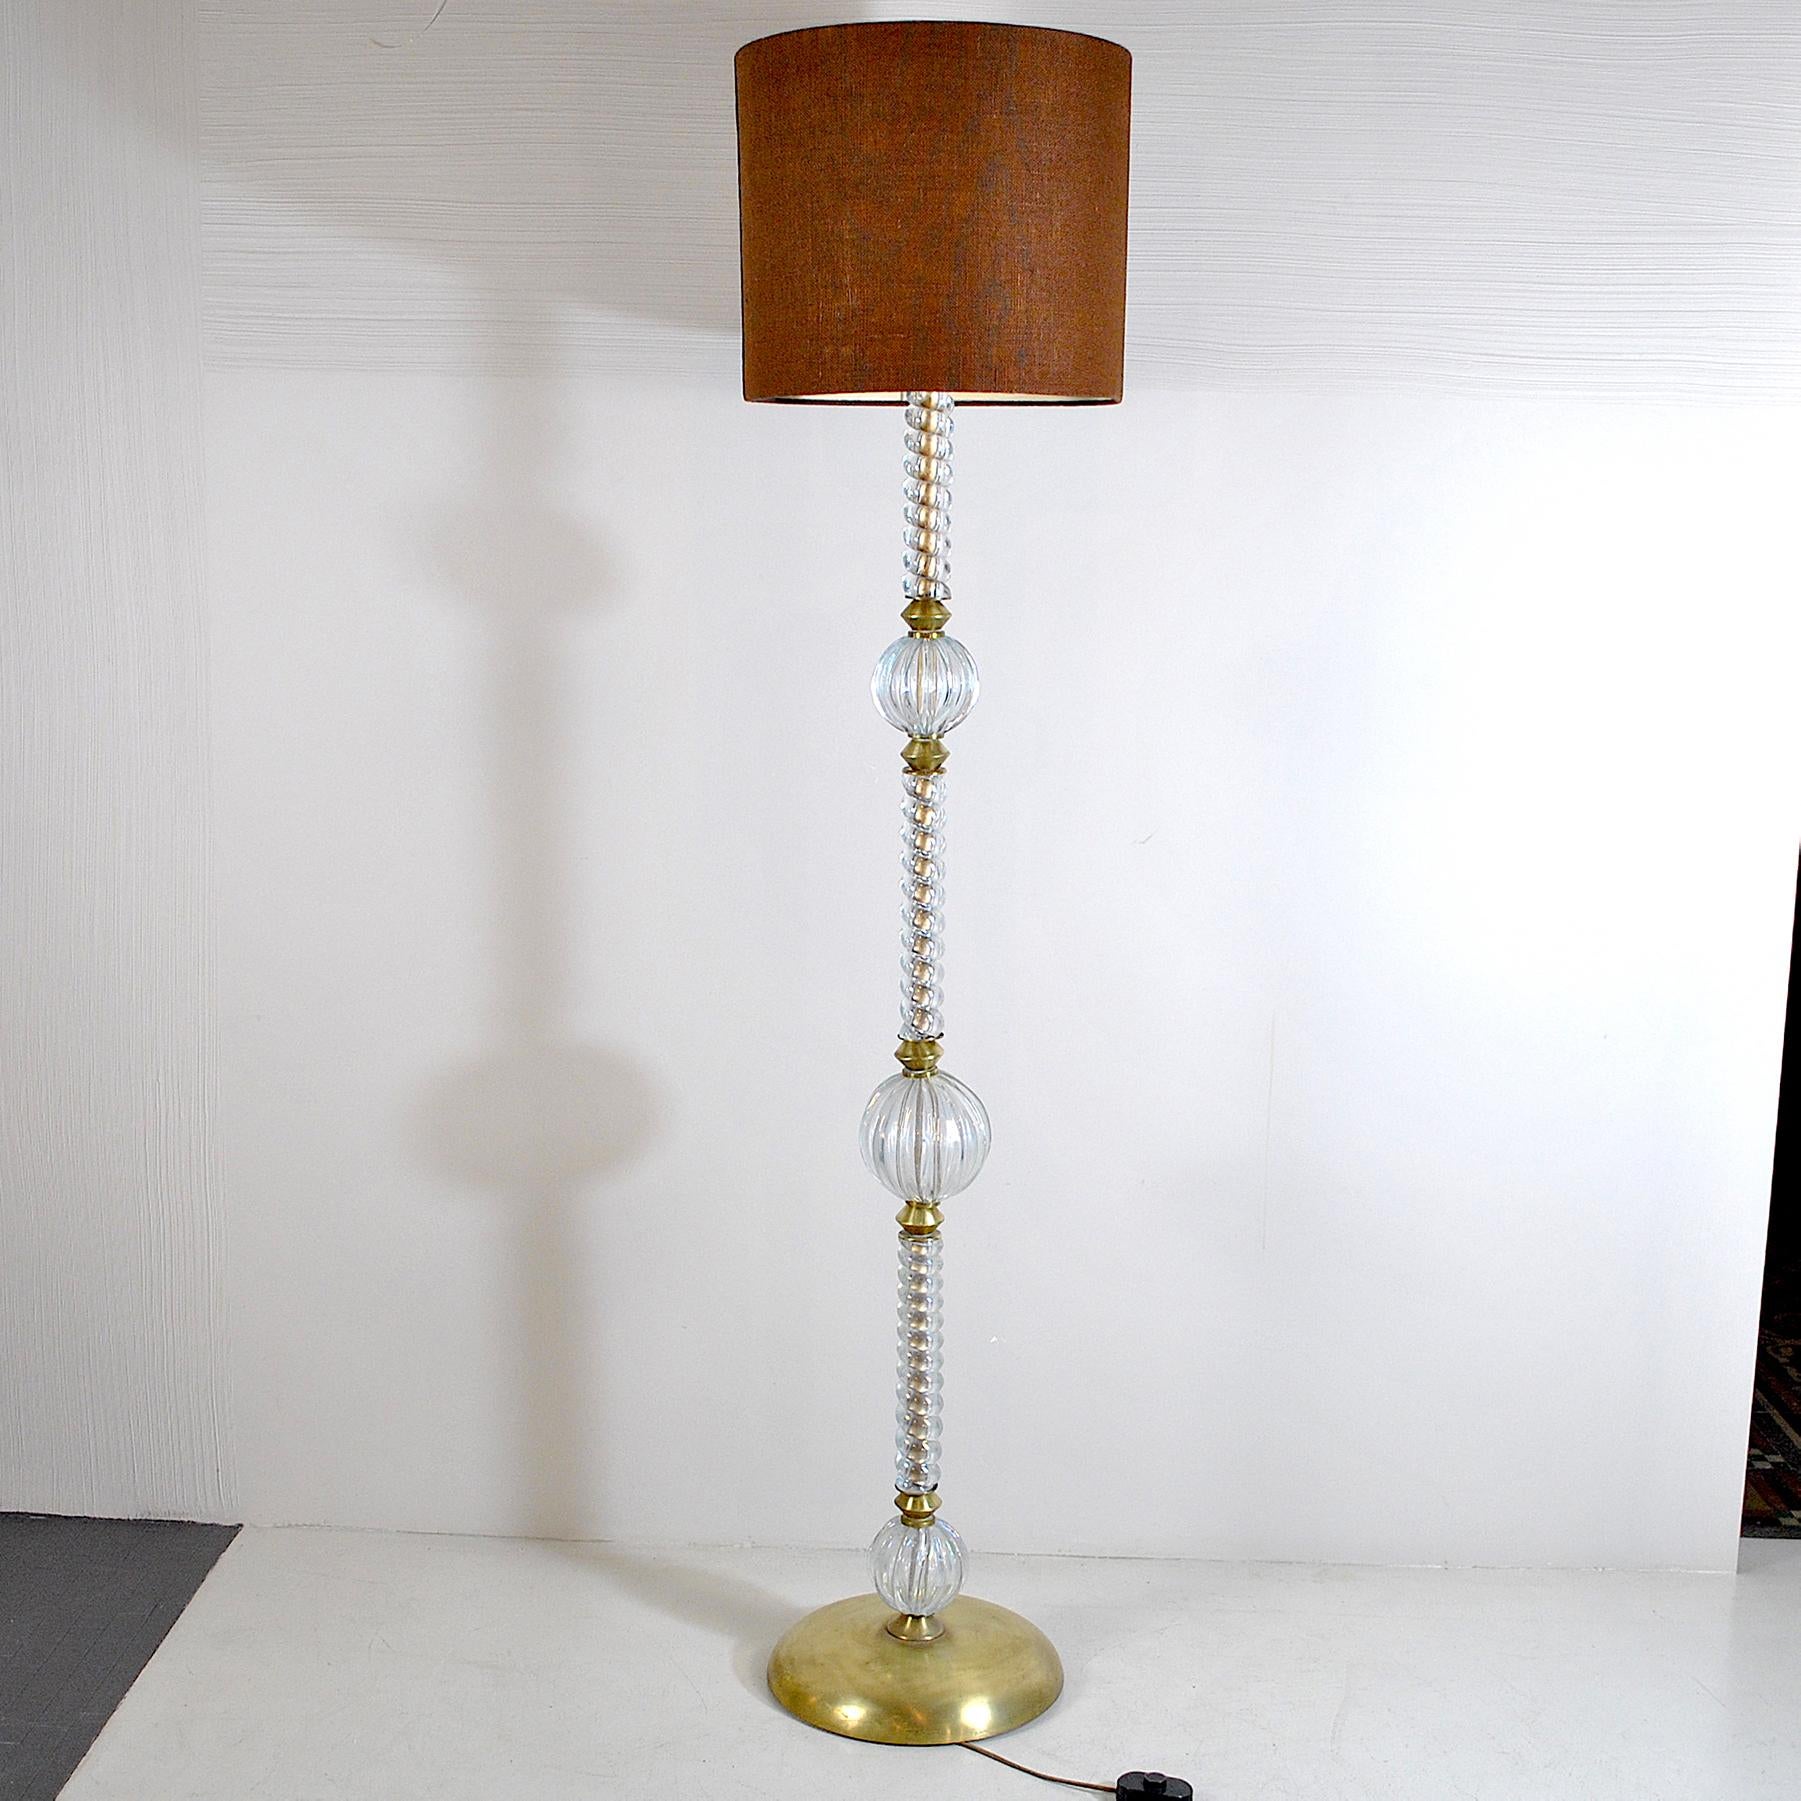 Italian Midcentury Floor Lamp by Barovier & Toso For Sale 3